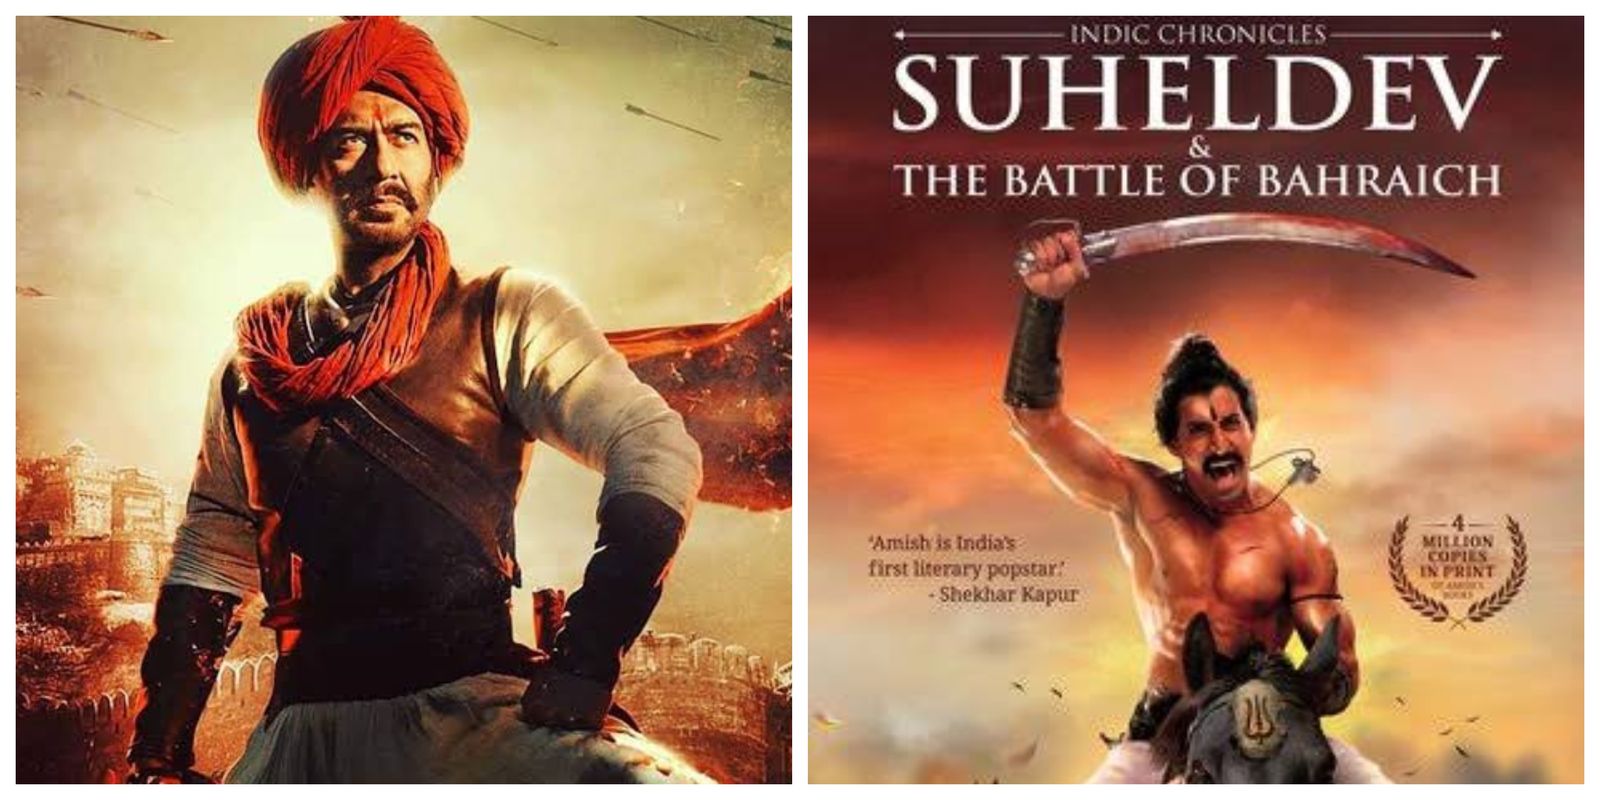 Ajay Devgn’s Next Film In The Unsung Warriors Series Is Going To Be Adapted From Amish Tripathi’s Book